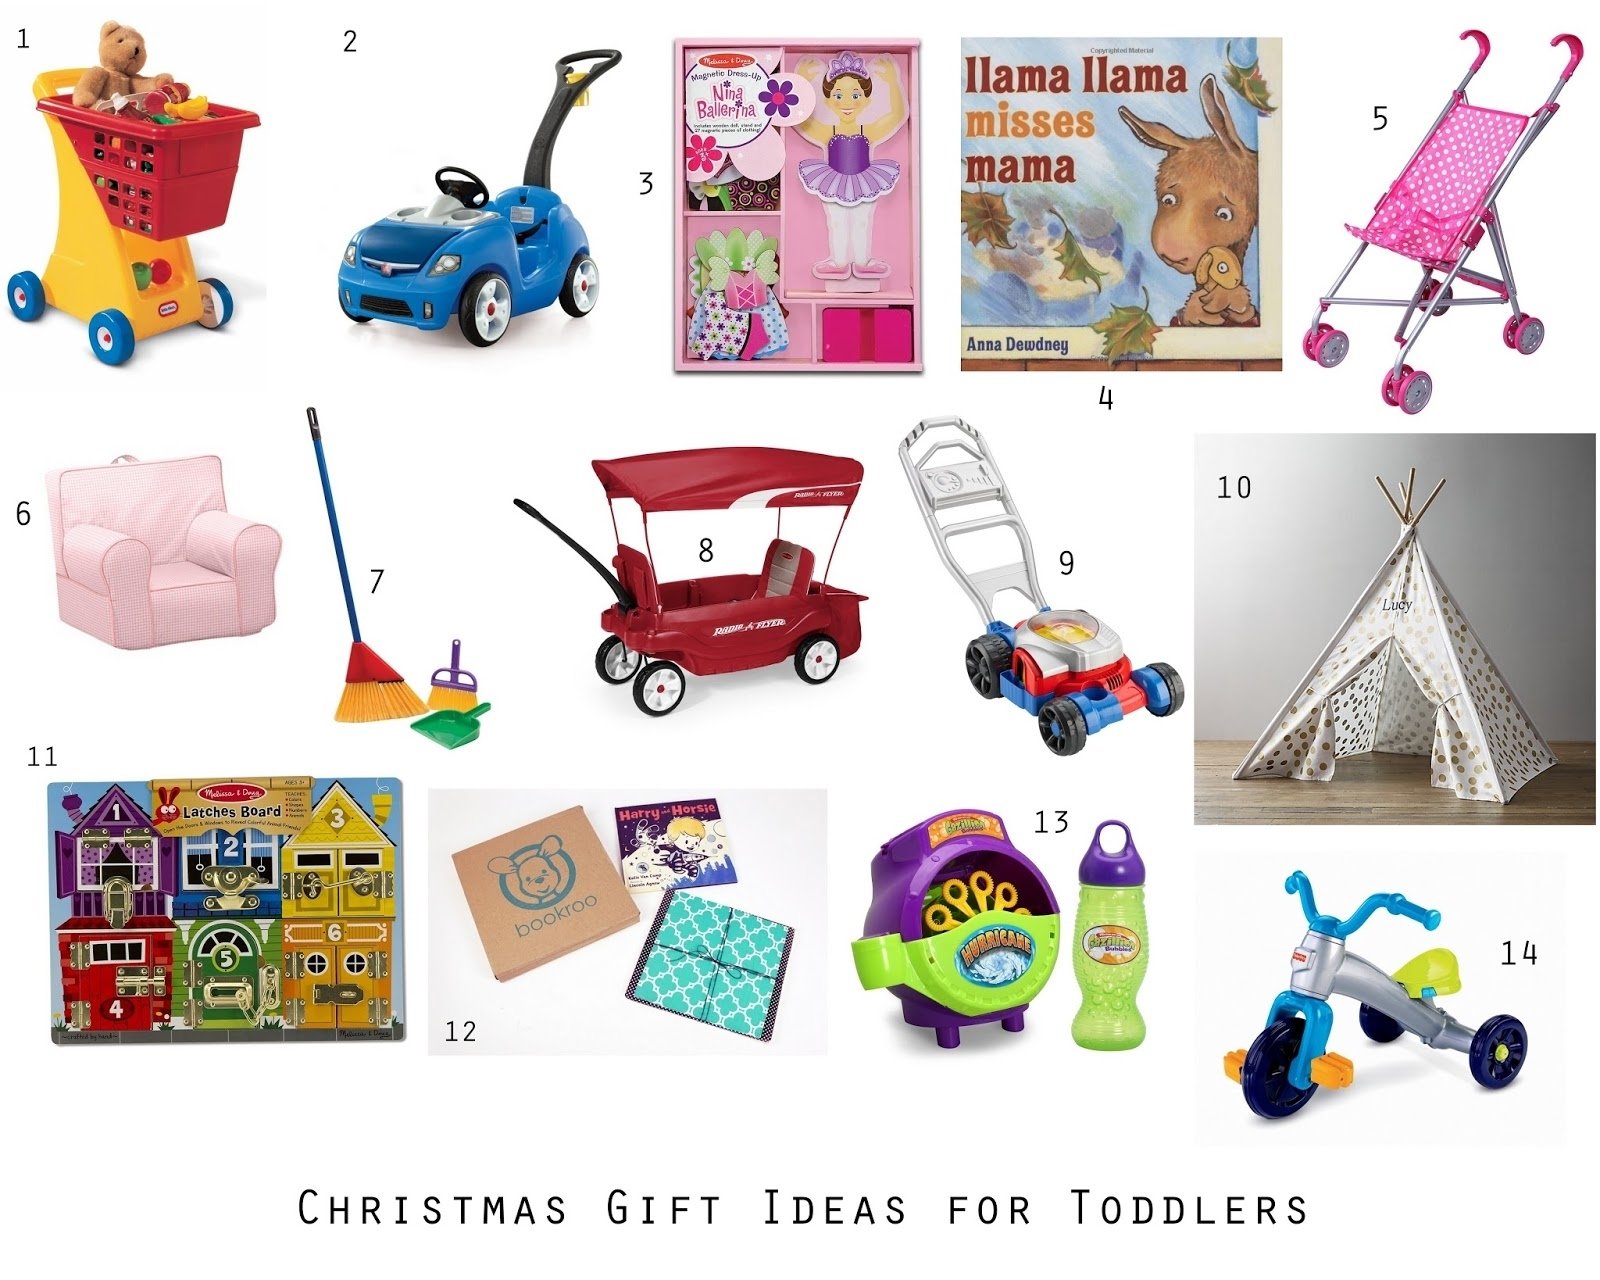 10 Gorgeous Christmas Gift Ideas For Toddlers life as the mrs thoughts for thursday christmas gift ideas for 2 2022